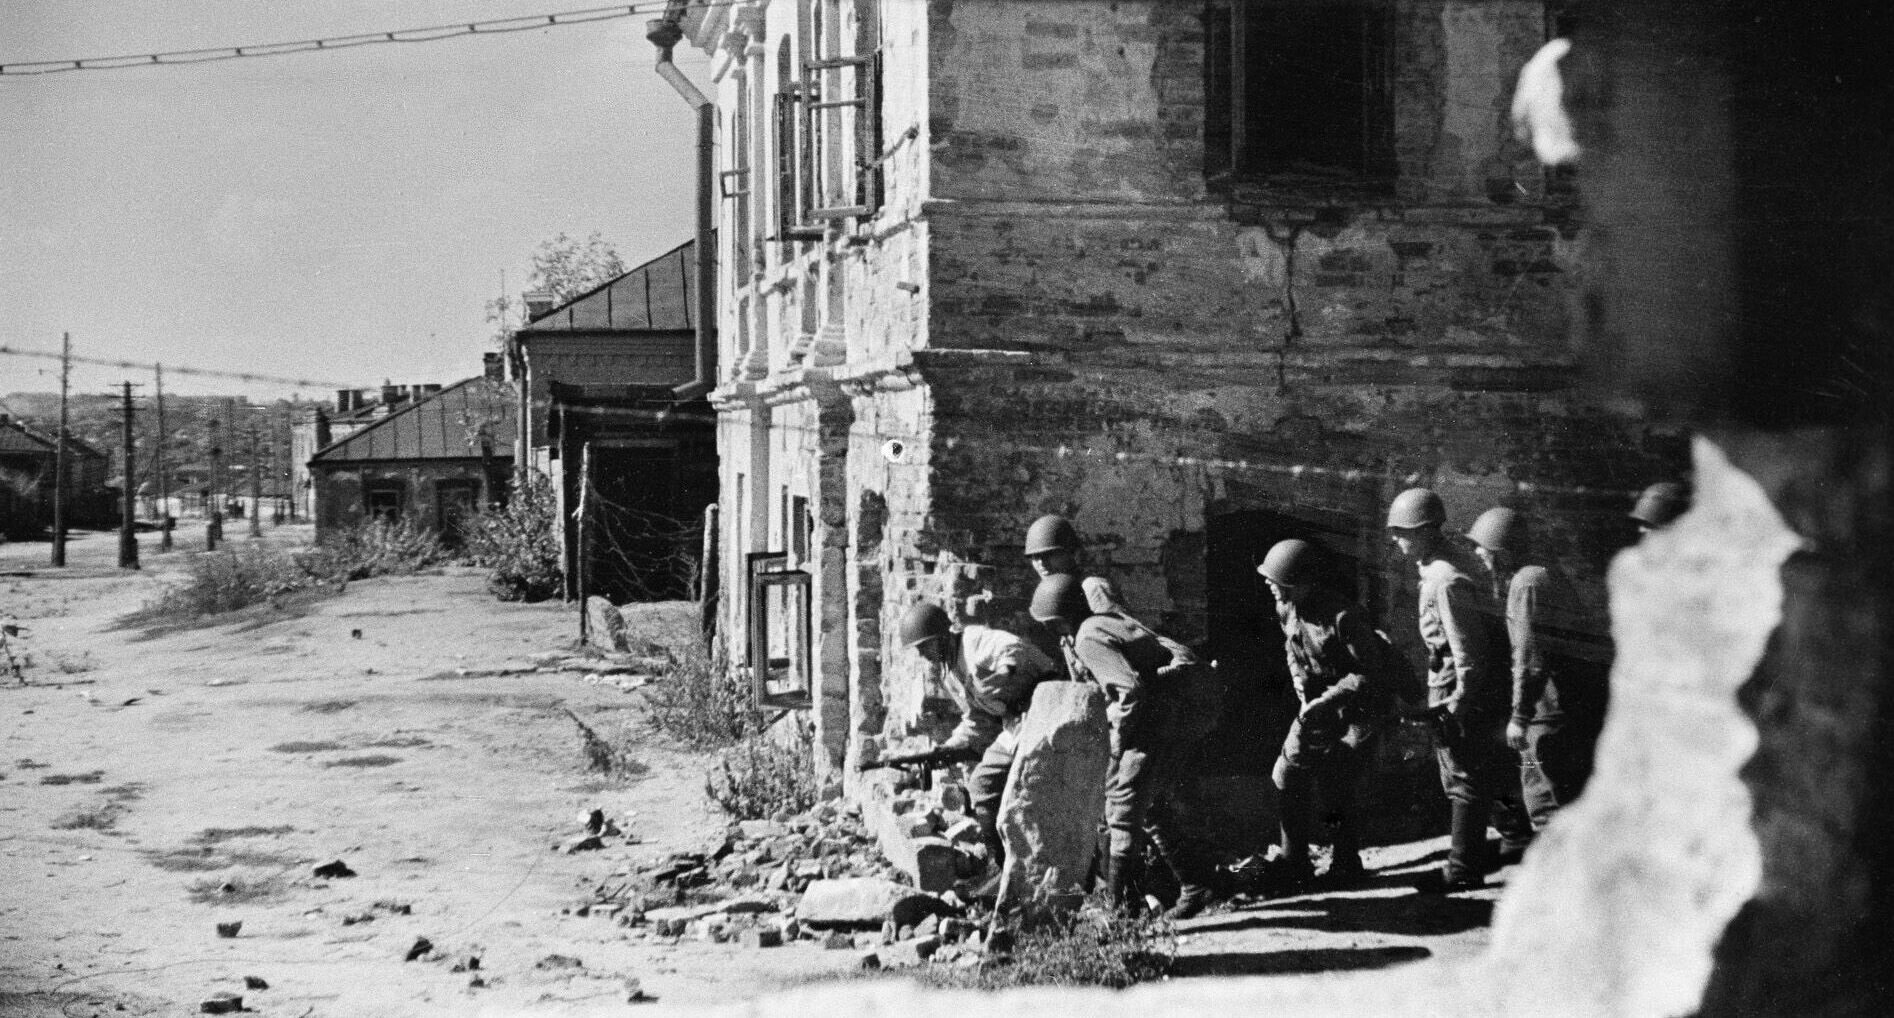 Red Army soldiers intent on defending the city of Voronezh peer cautiously around the corner of a building in anticipation of encountering the German invaders. At first the German advance during Case Blue made good progress against the Russian defenders.